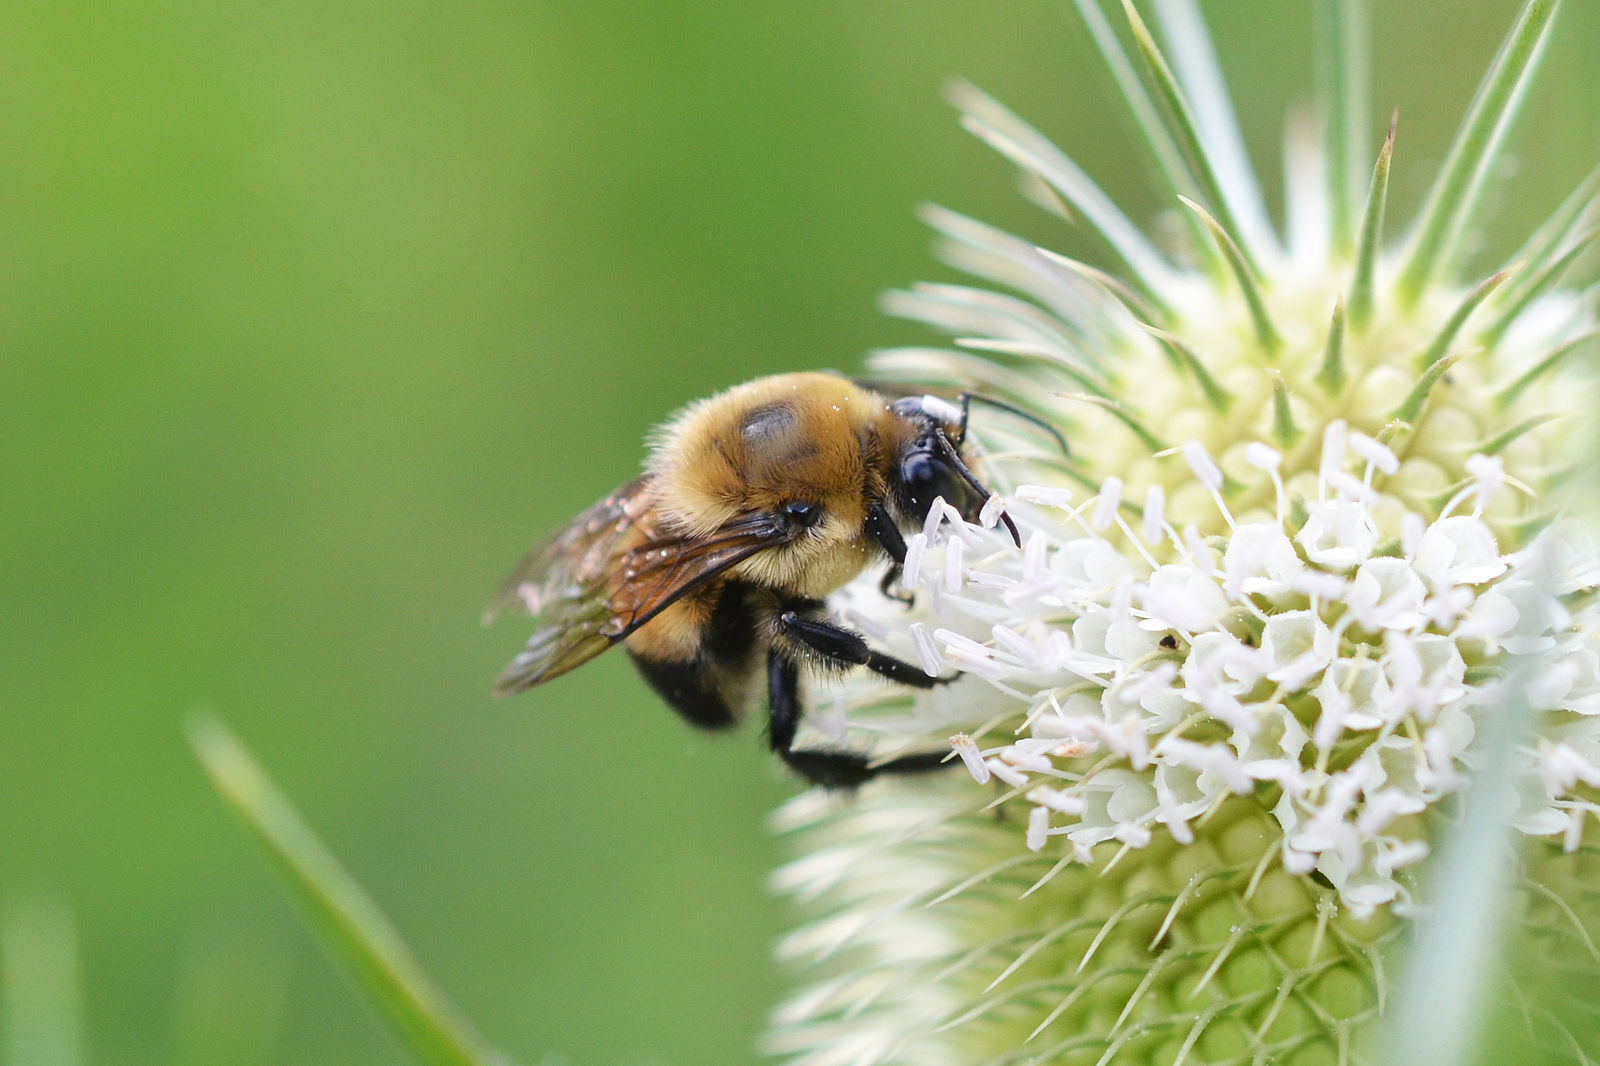 Brown-belted Bumble Bee (Bombus griseocollis). Credit: Andrew C